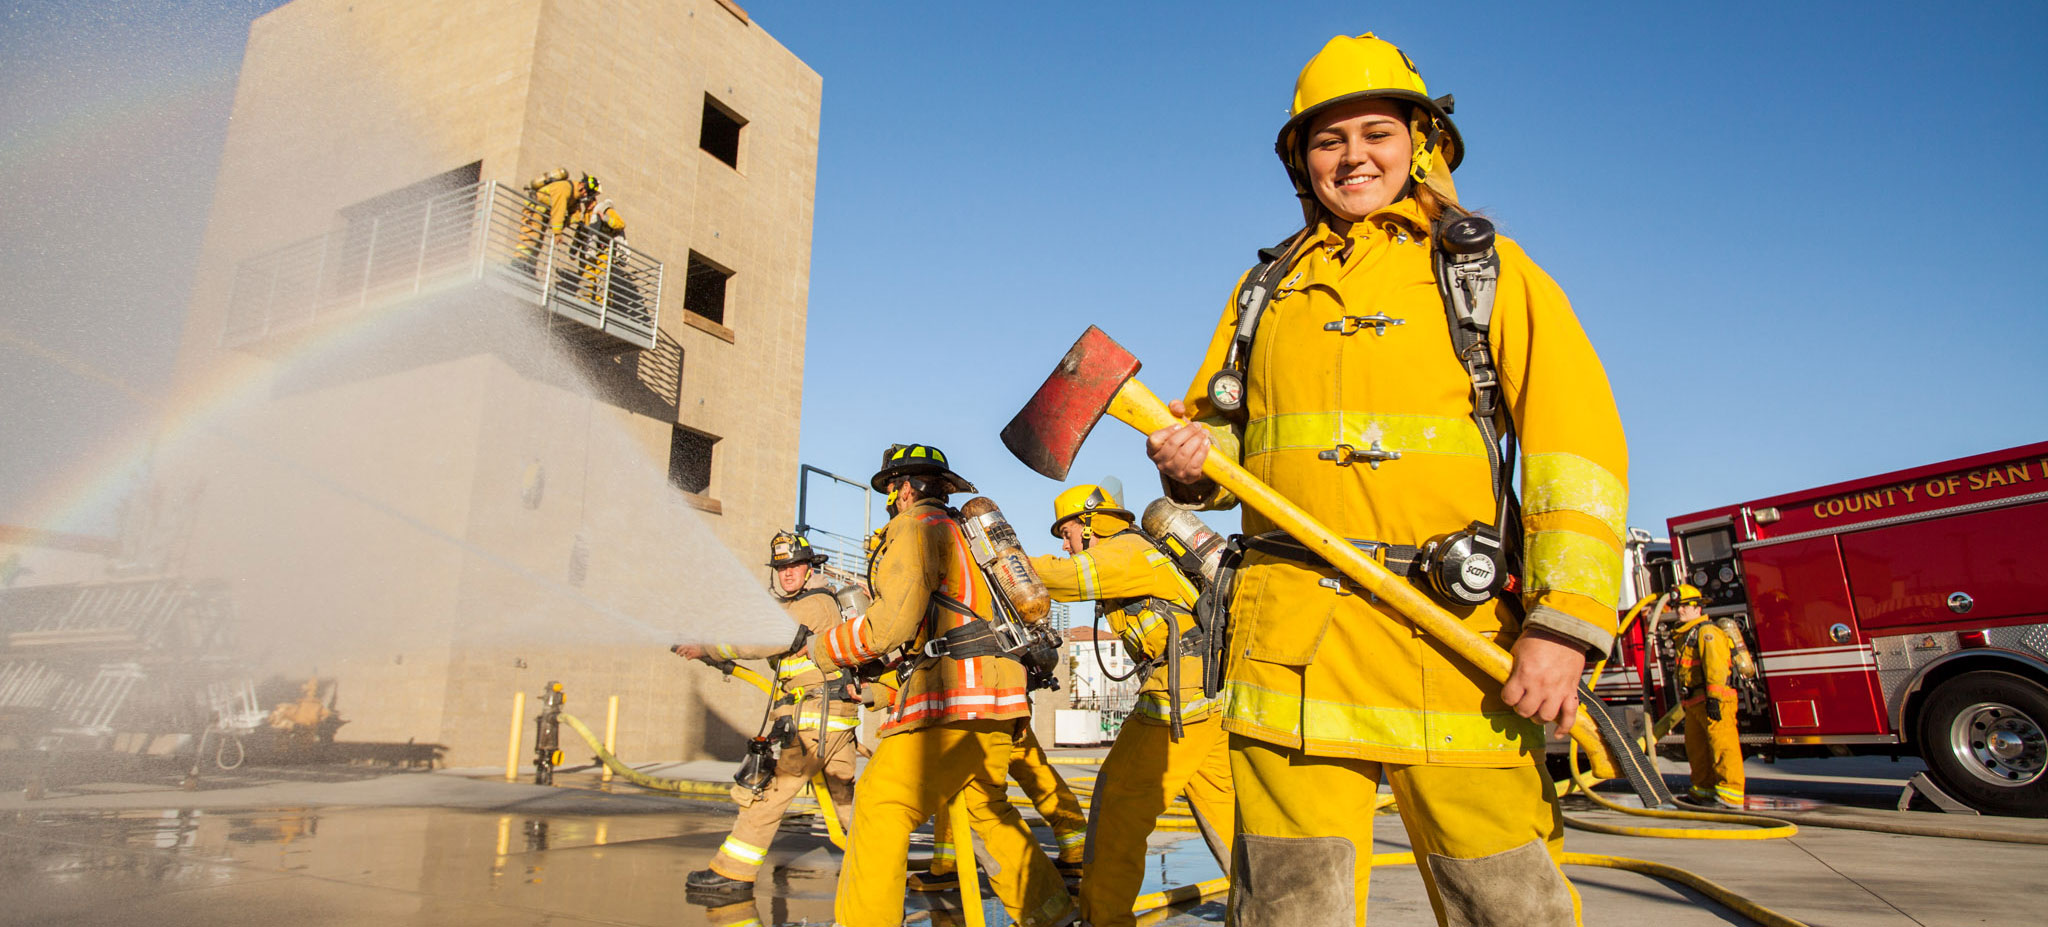 A firefighting student is wearing yellow protective fire gear and holding an axe. There are three fire students behind her in yellow gear using fire hoses